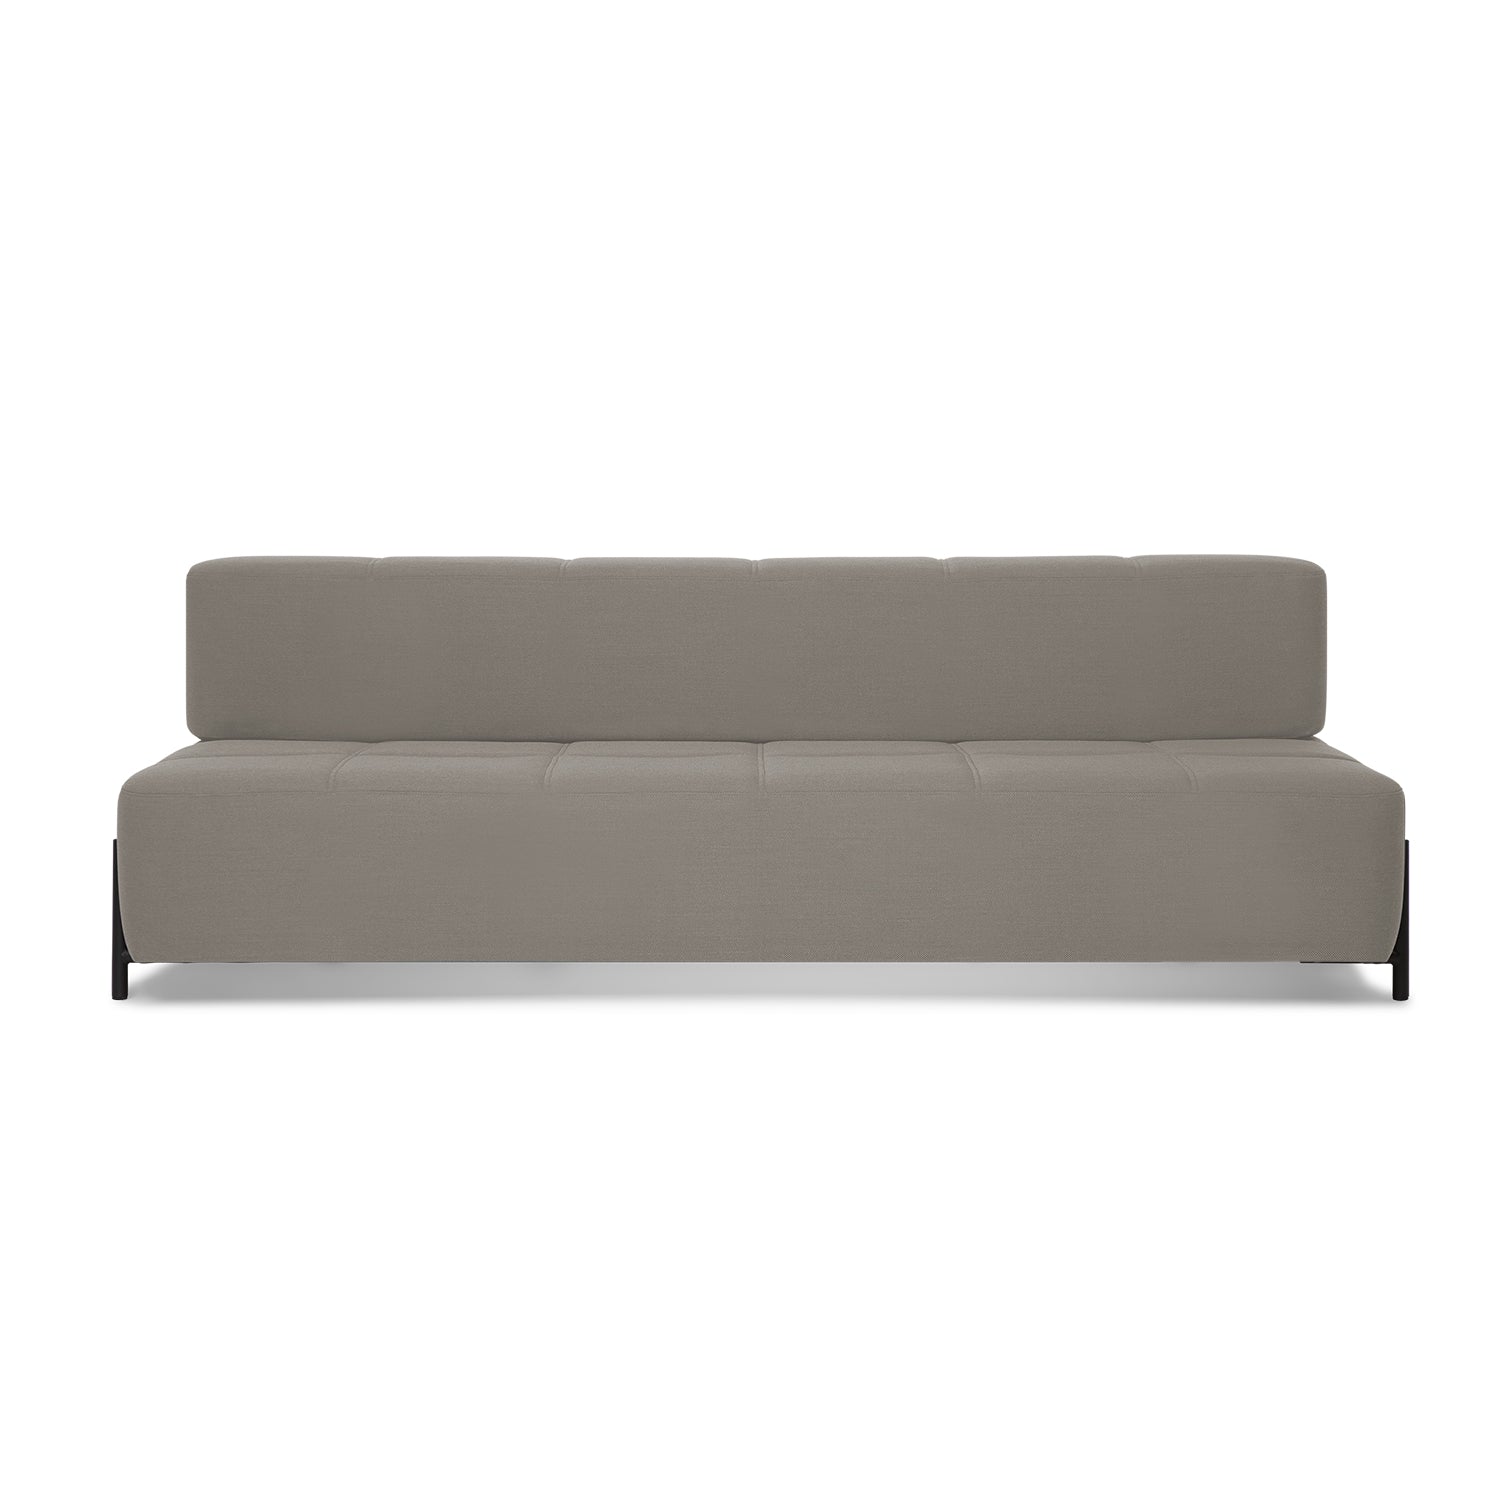 Northern Daybe Sofabed without Armrest in Brown